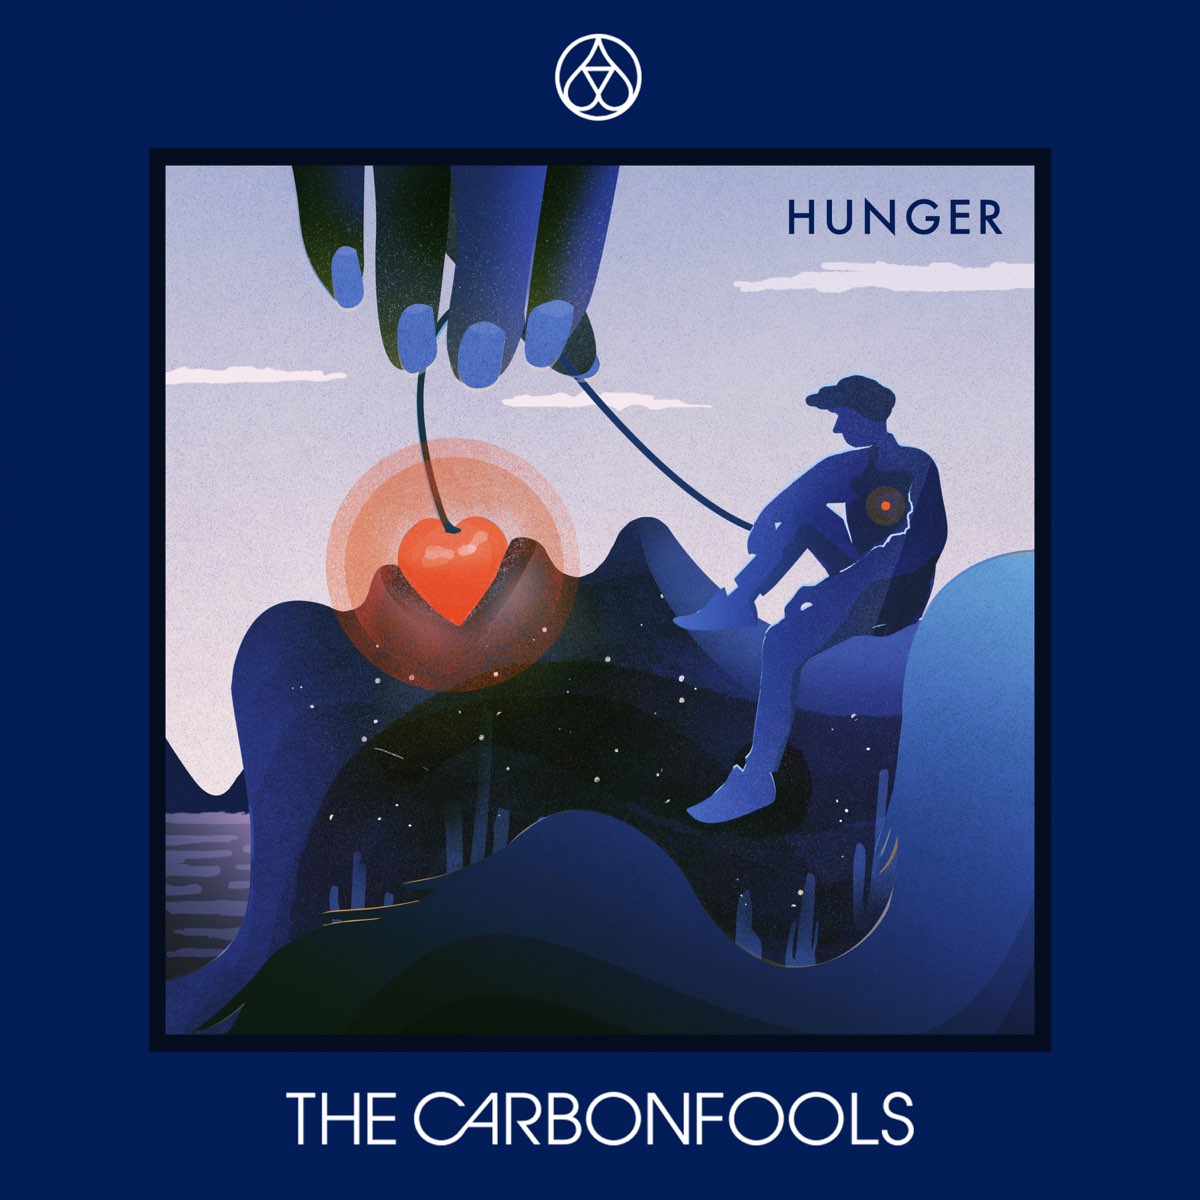 Голод музыка. The carbonfools Hunger. Mobiius Hunger Single.